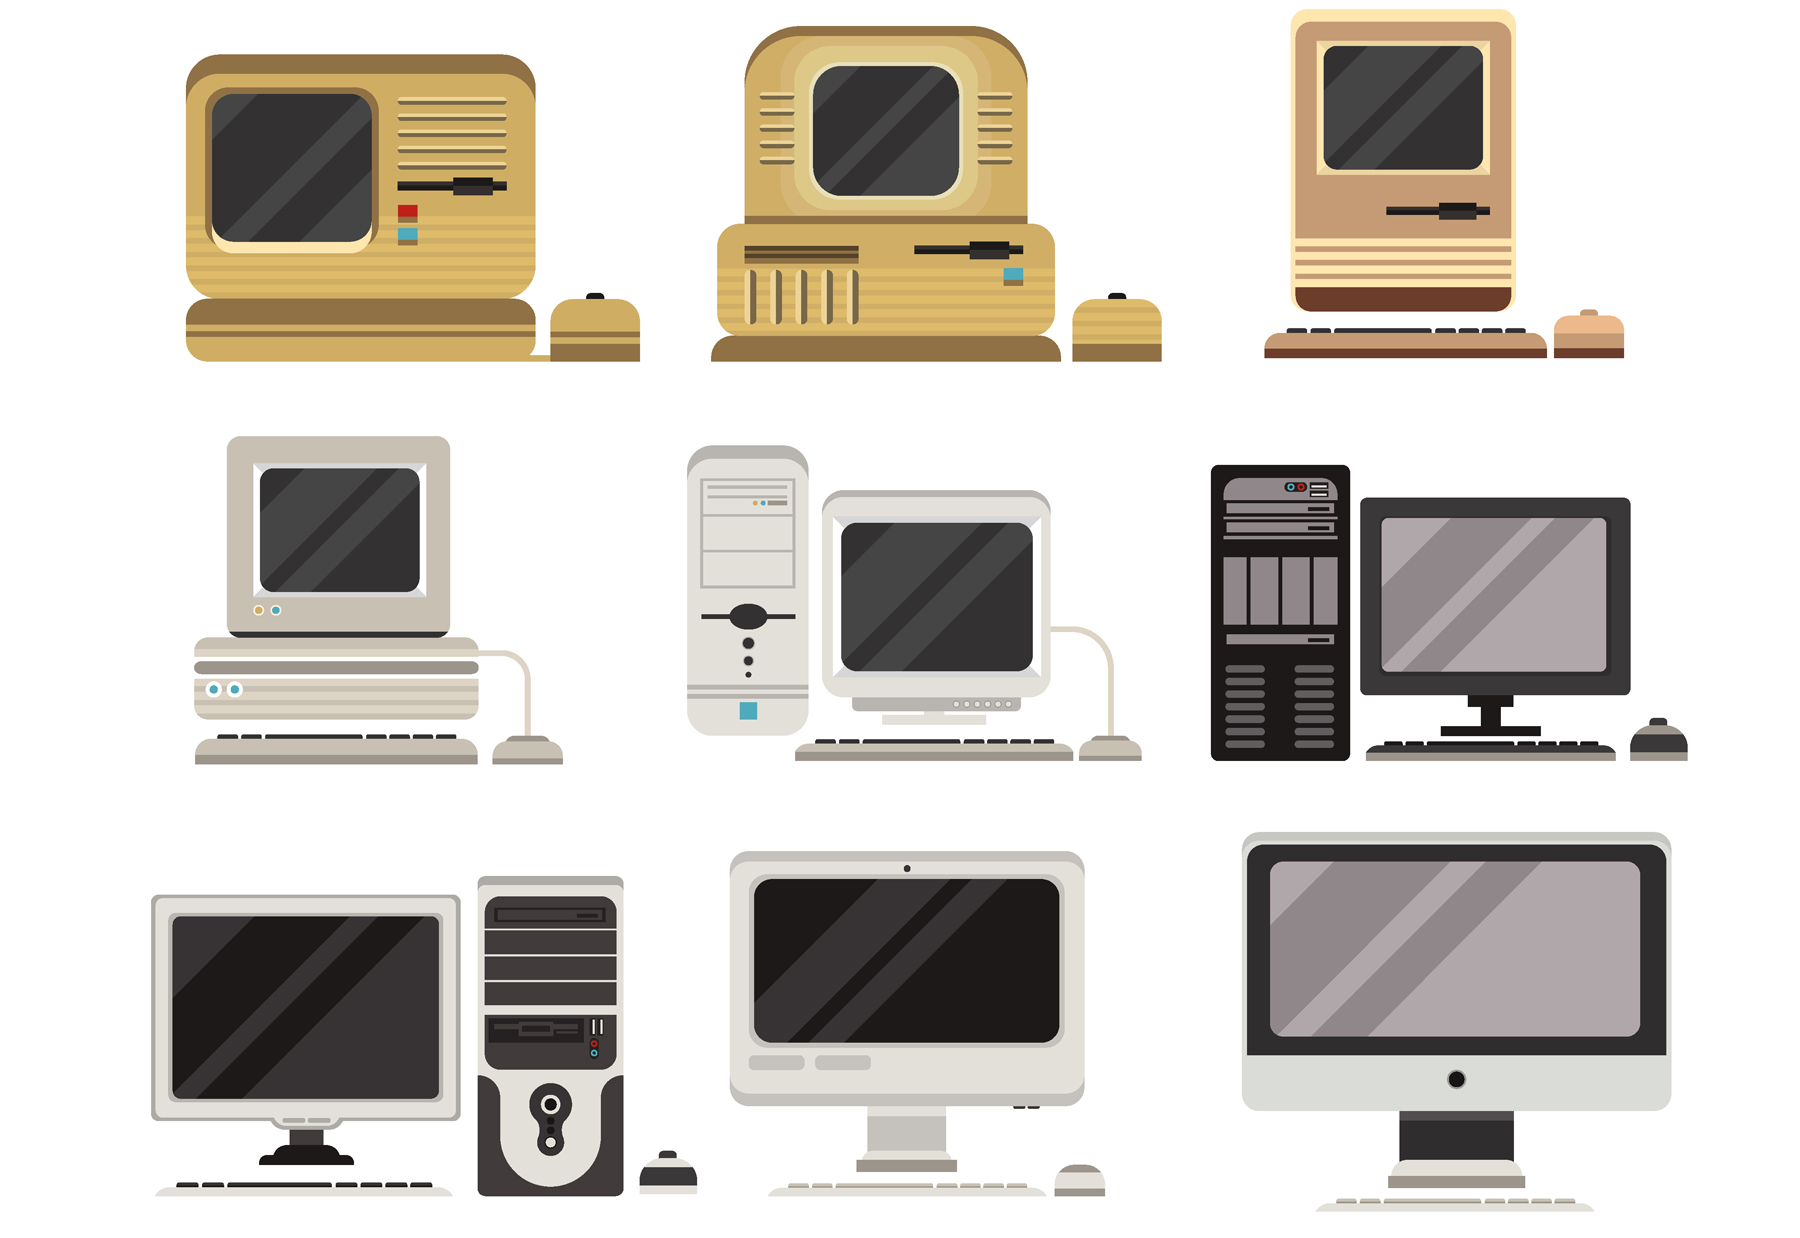 Illustrated computers over time